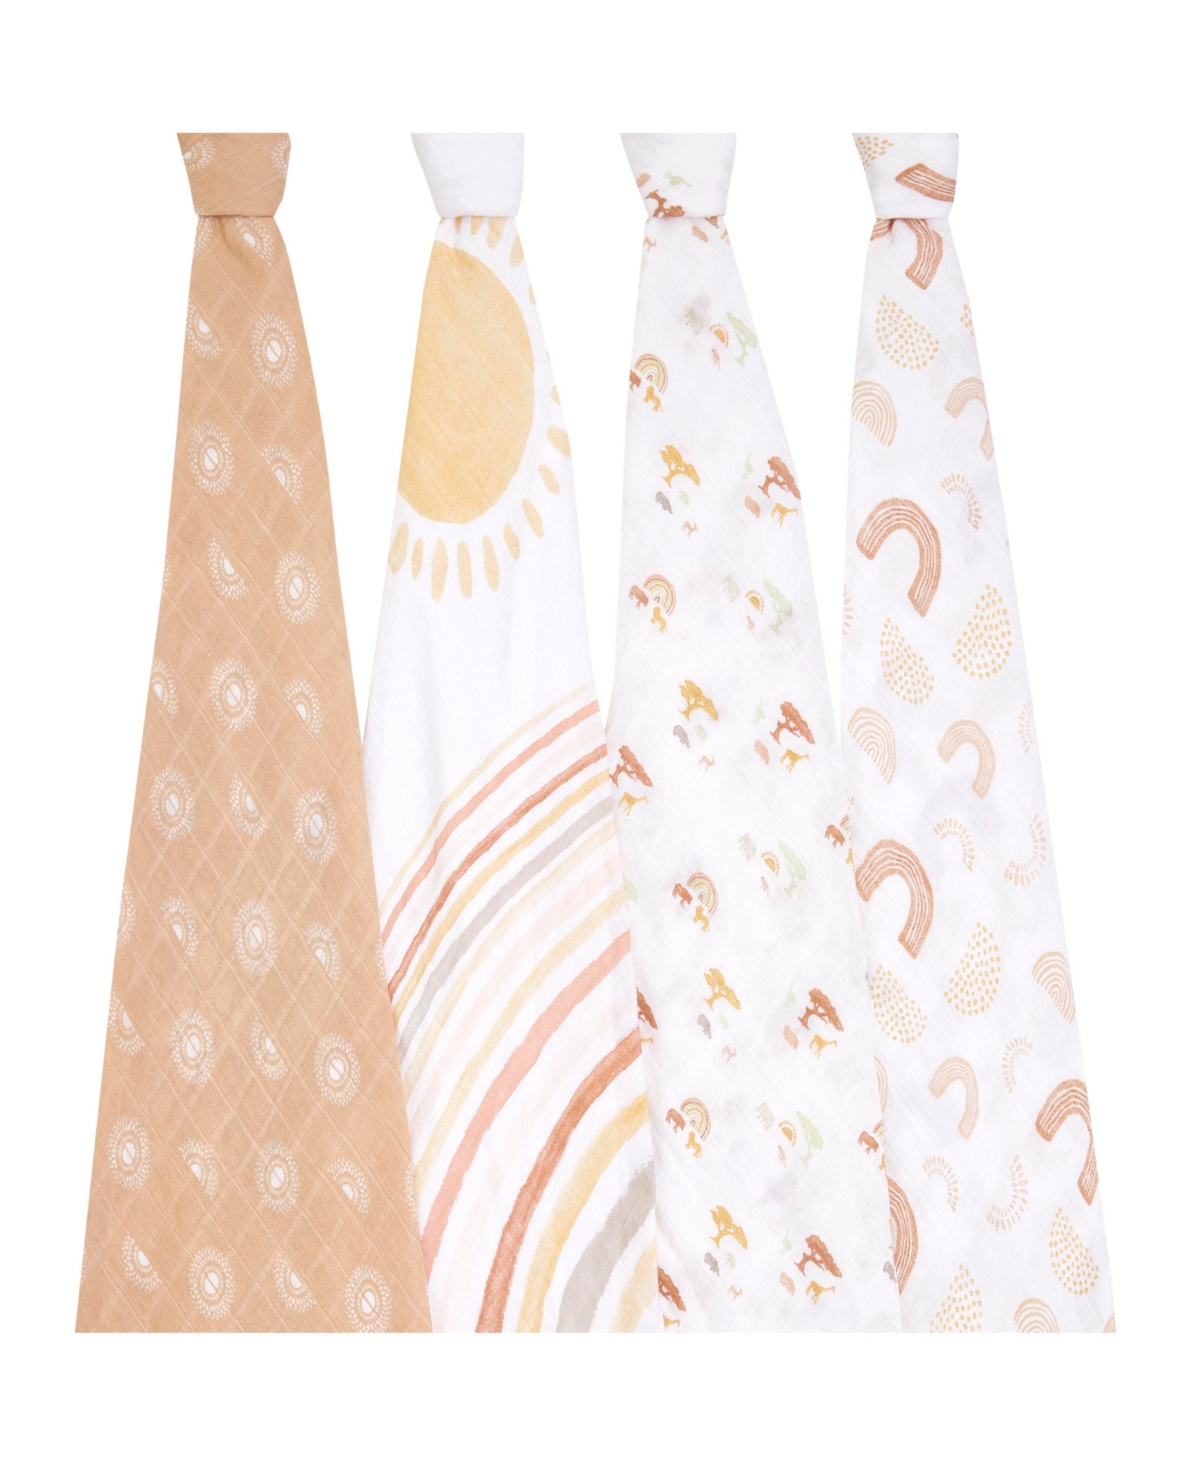 Aden By Aden + Anais Babies'  Keep Rising Swaddle Blankets, Pack Of 4 In Multi